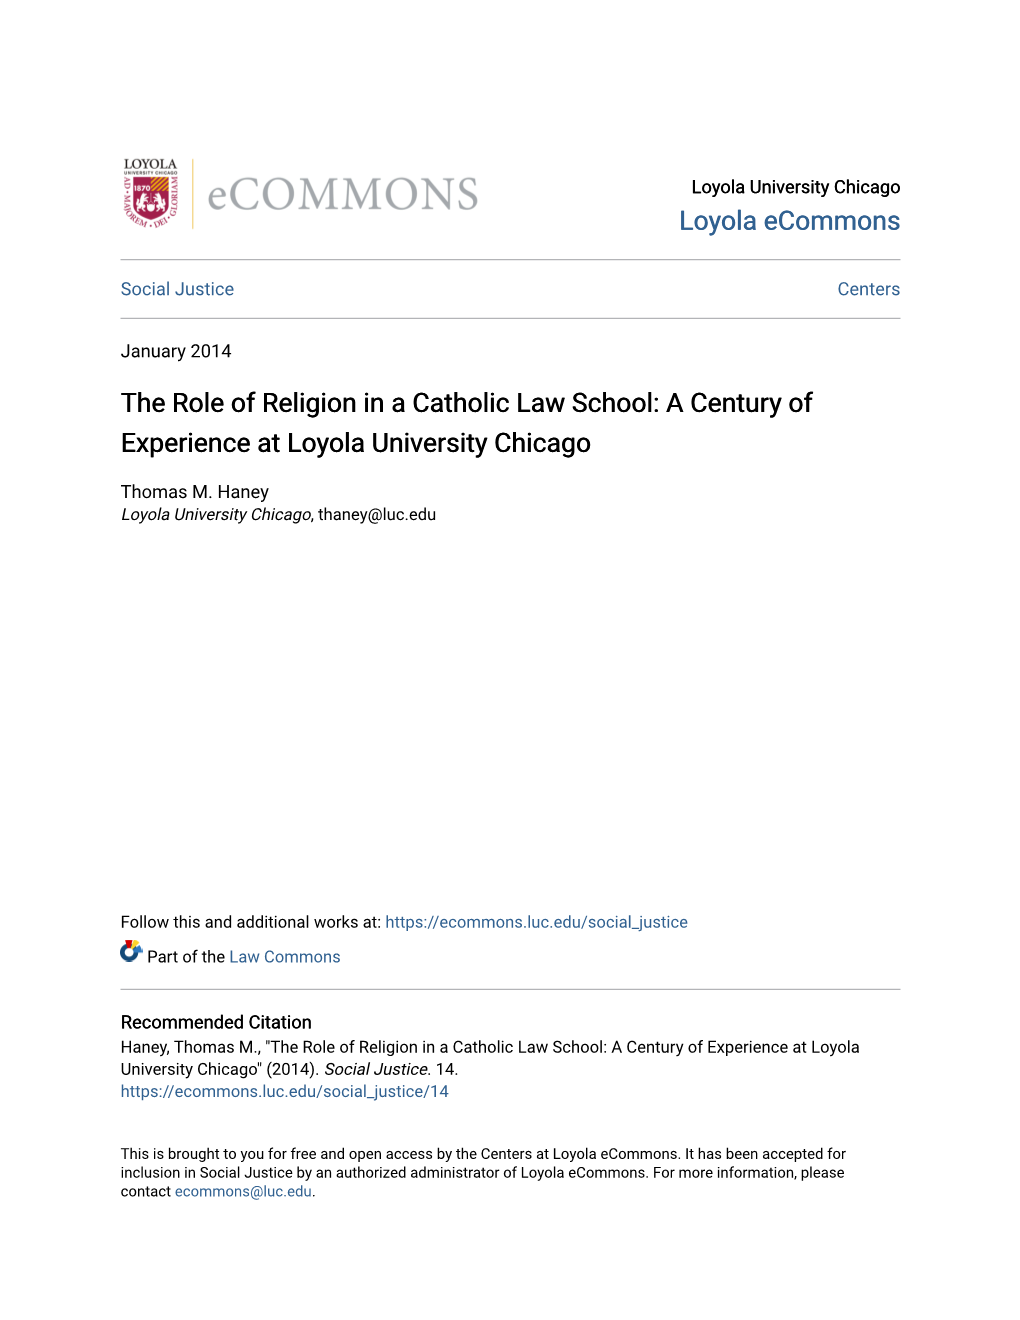 The Role of Religion in a Catholic Law School: a Century of Experience at Loyola University Chicago